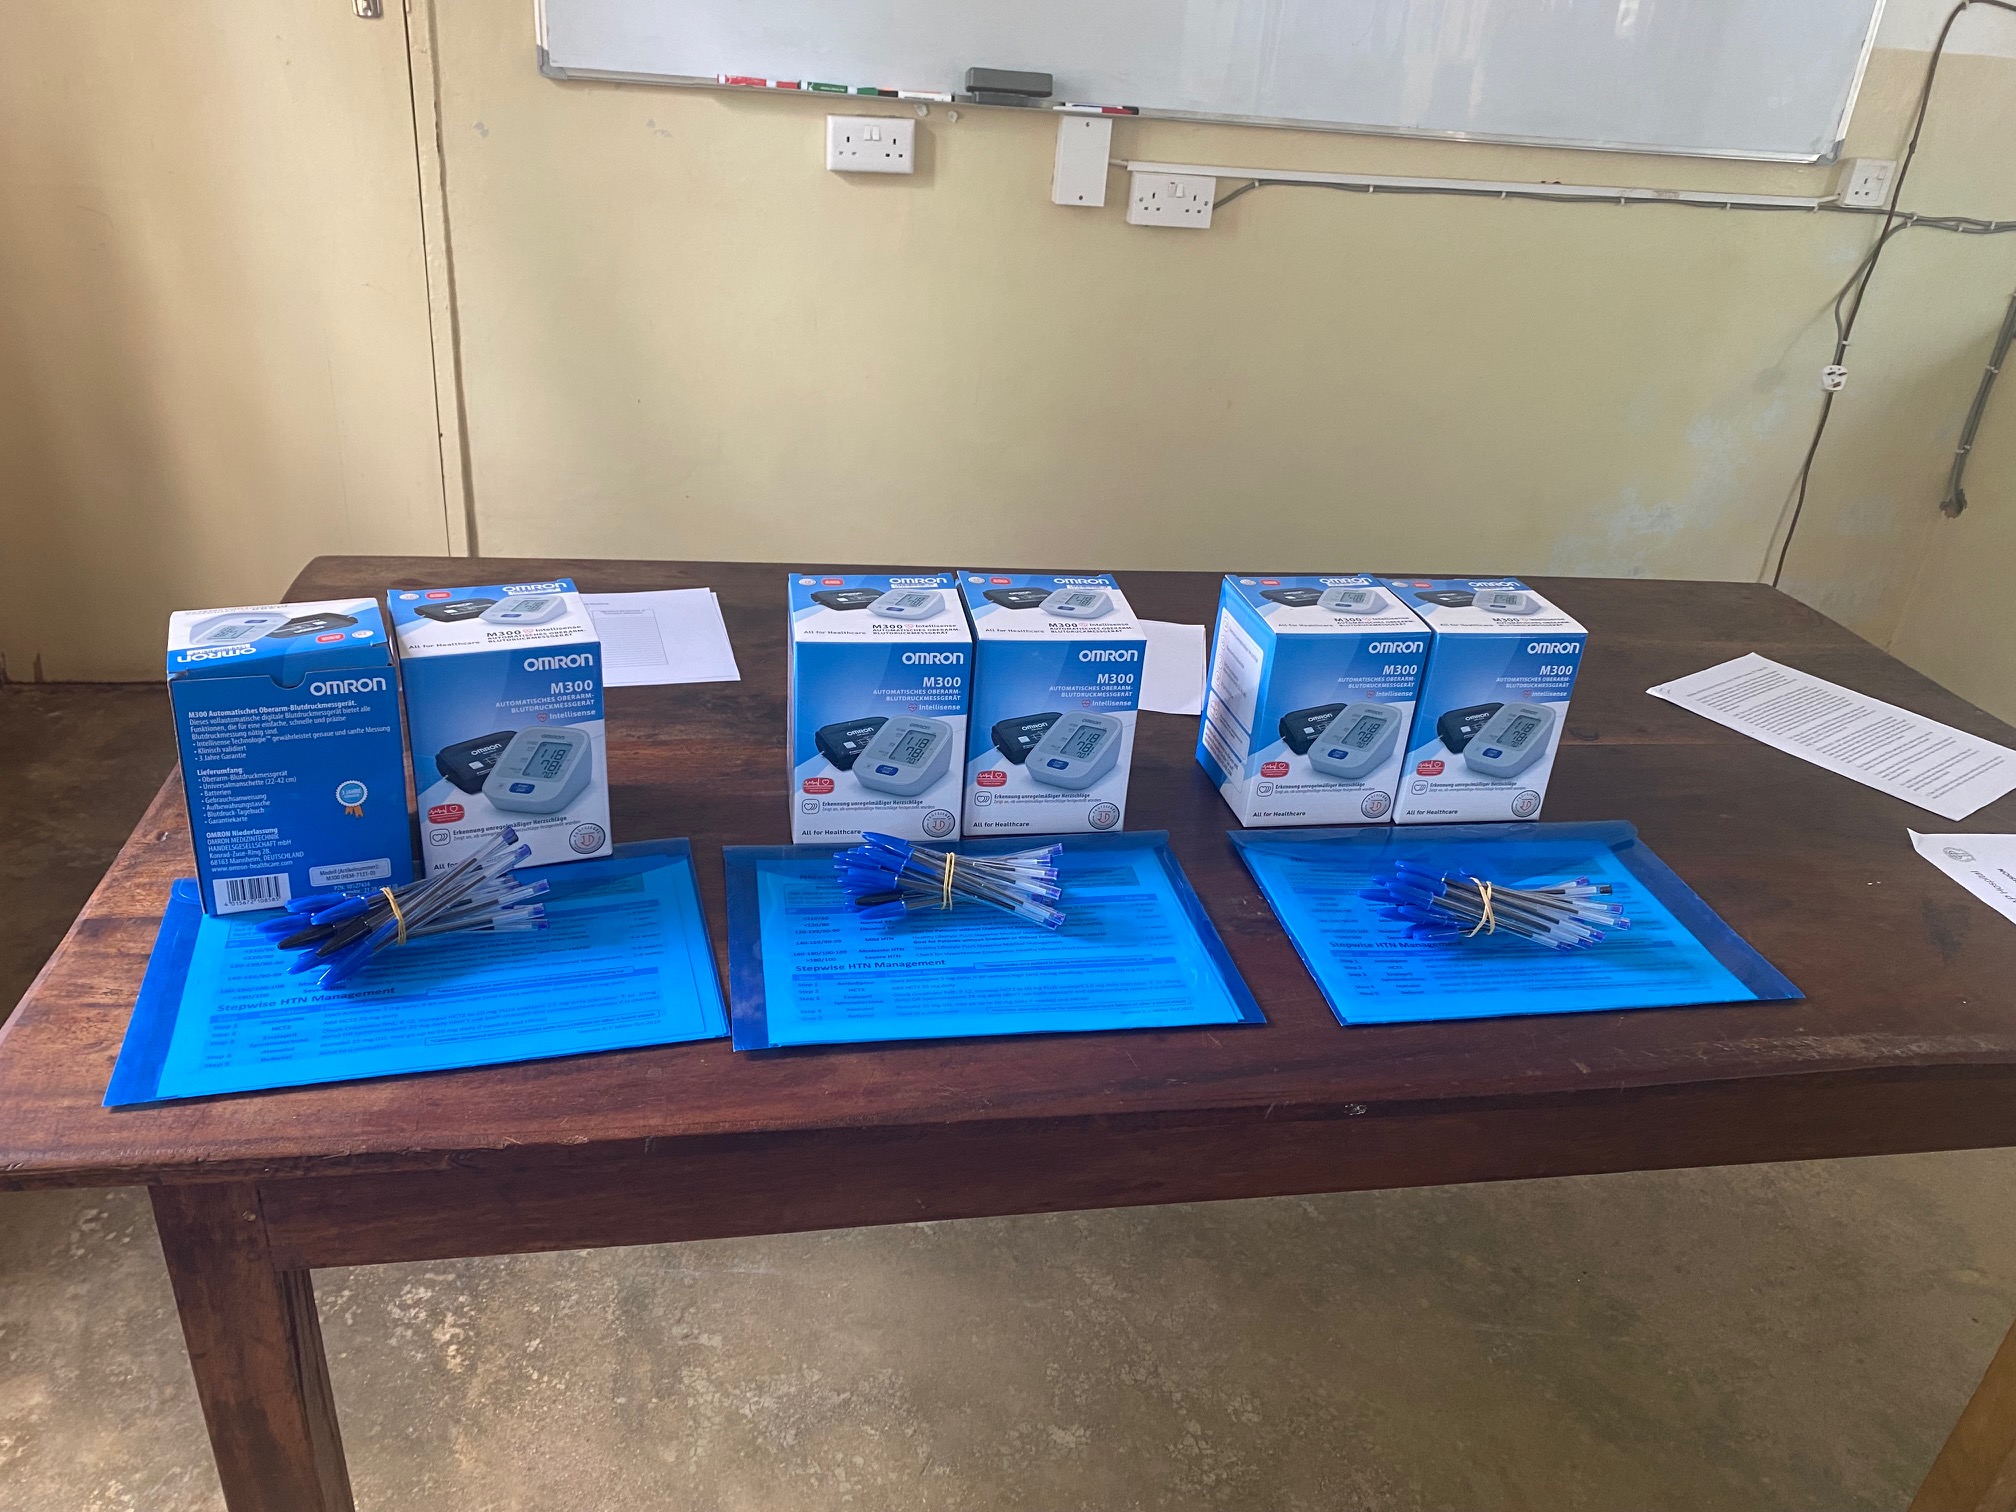 Equipment used for blood pressure monitoring in Malawi